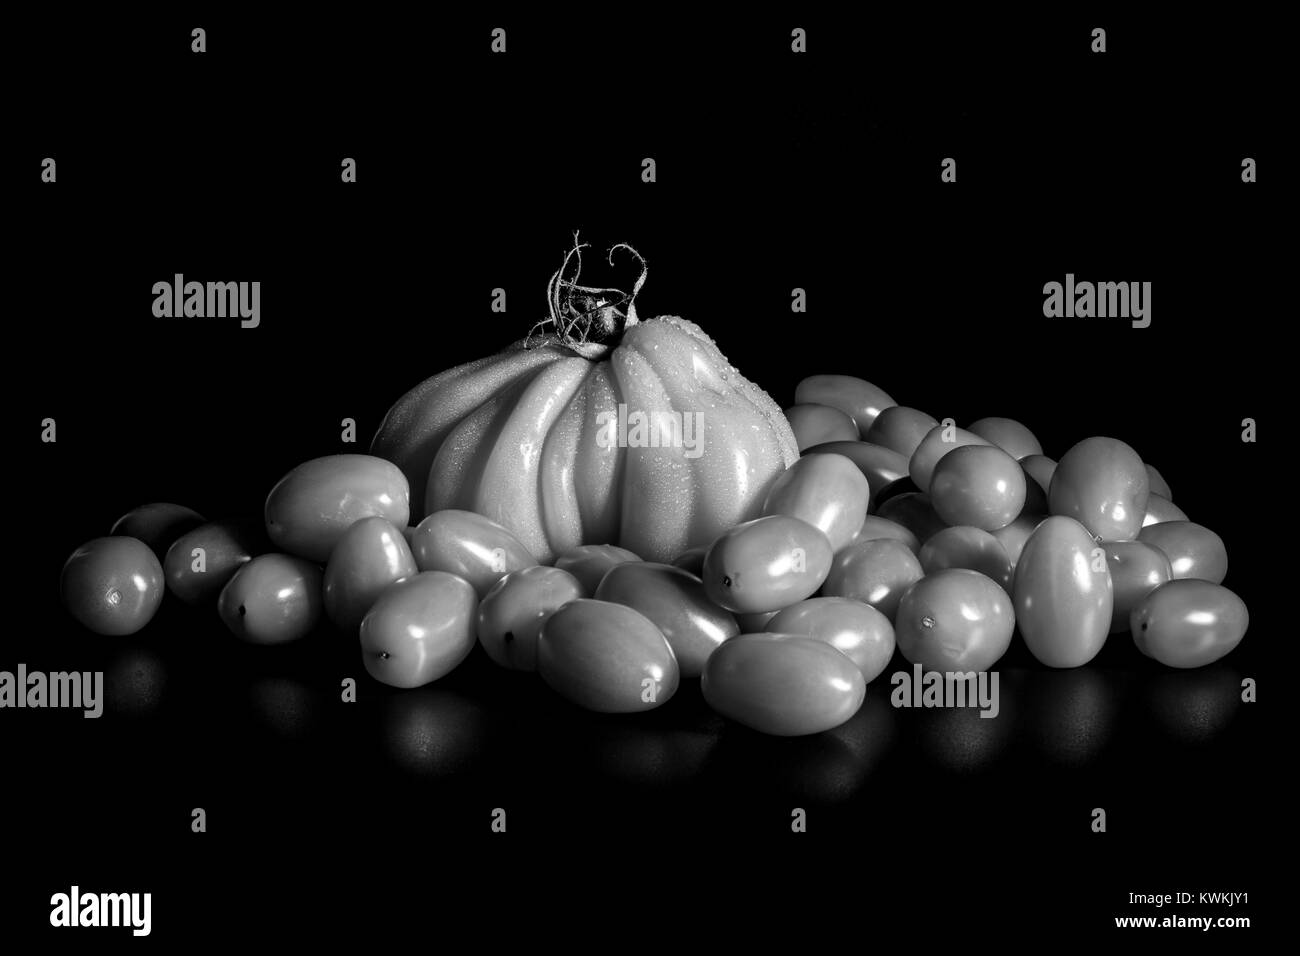 A black and white image of large beefsteak tomato surrounded by small baby plum tomatoes. Lighting emphasises shape and texture. Stock Photo